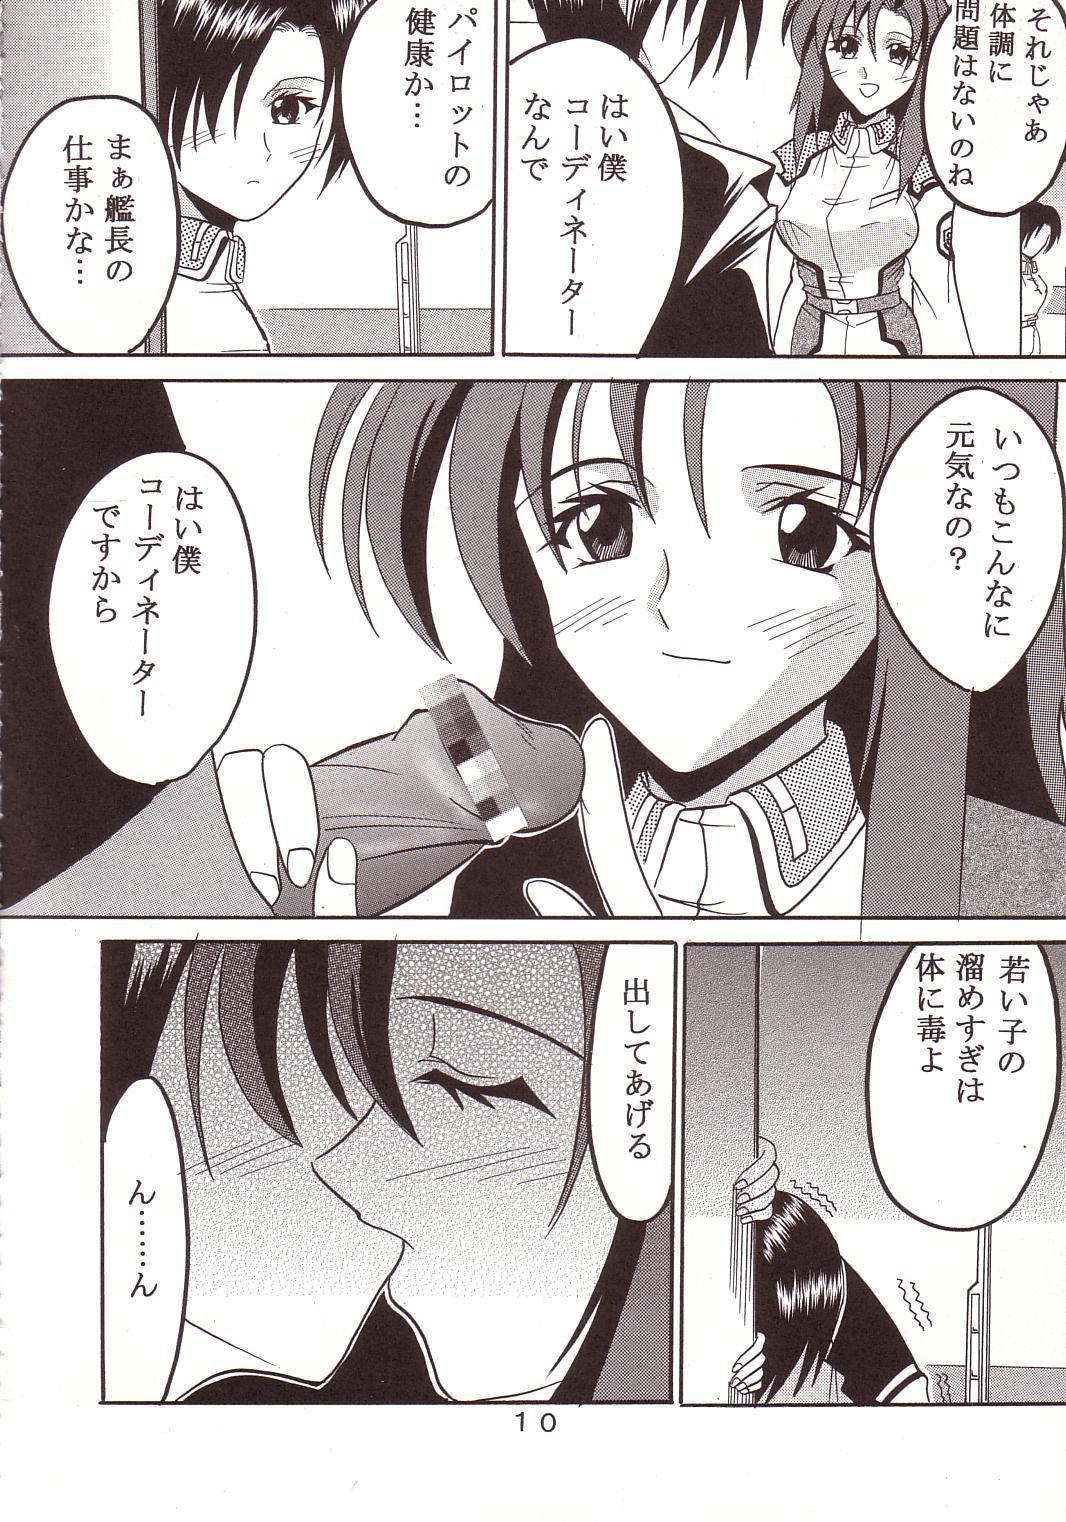 Sesso SEED 3 - Gundam seed Sola - Page 11